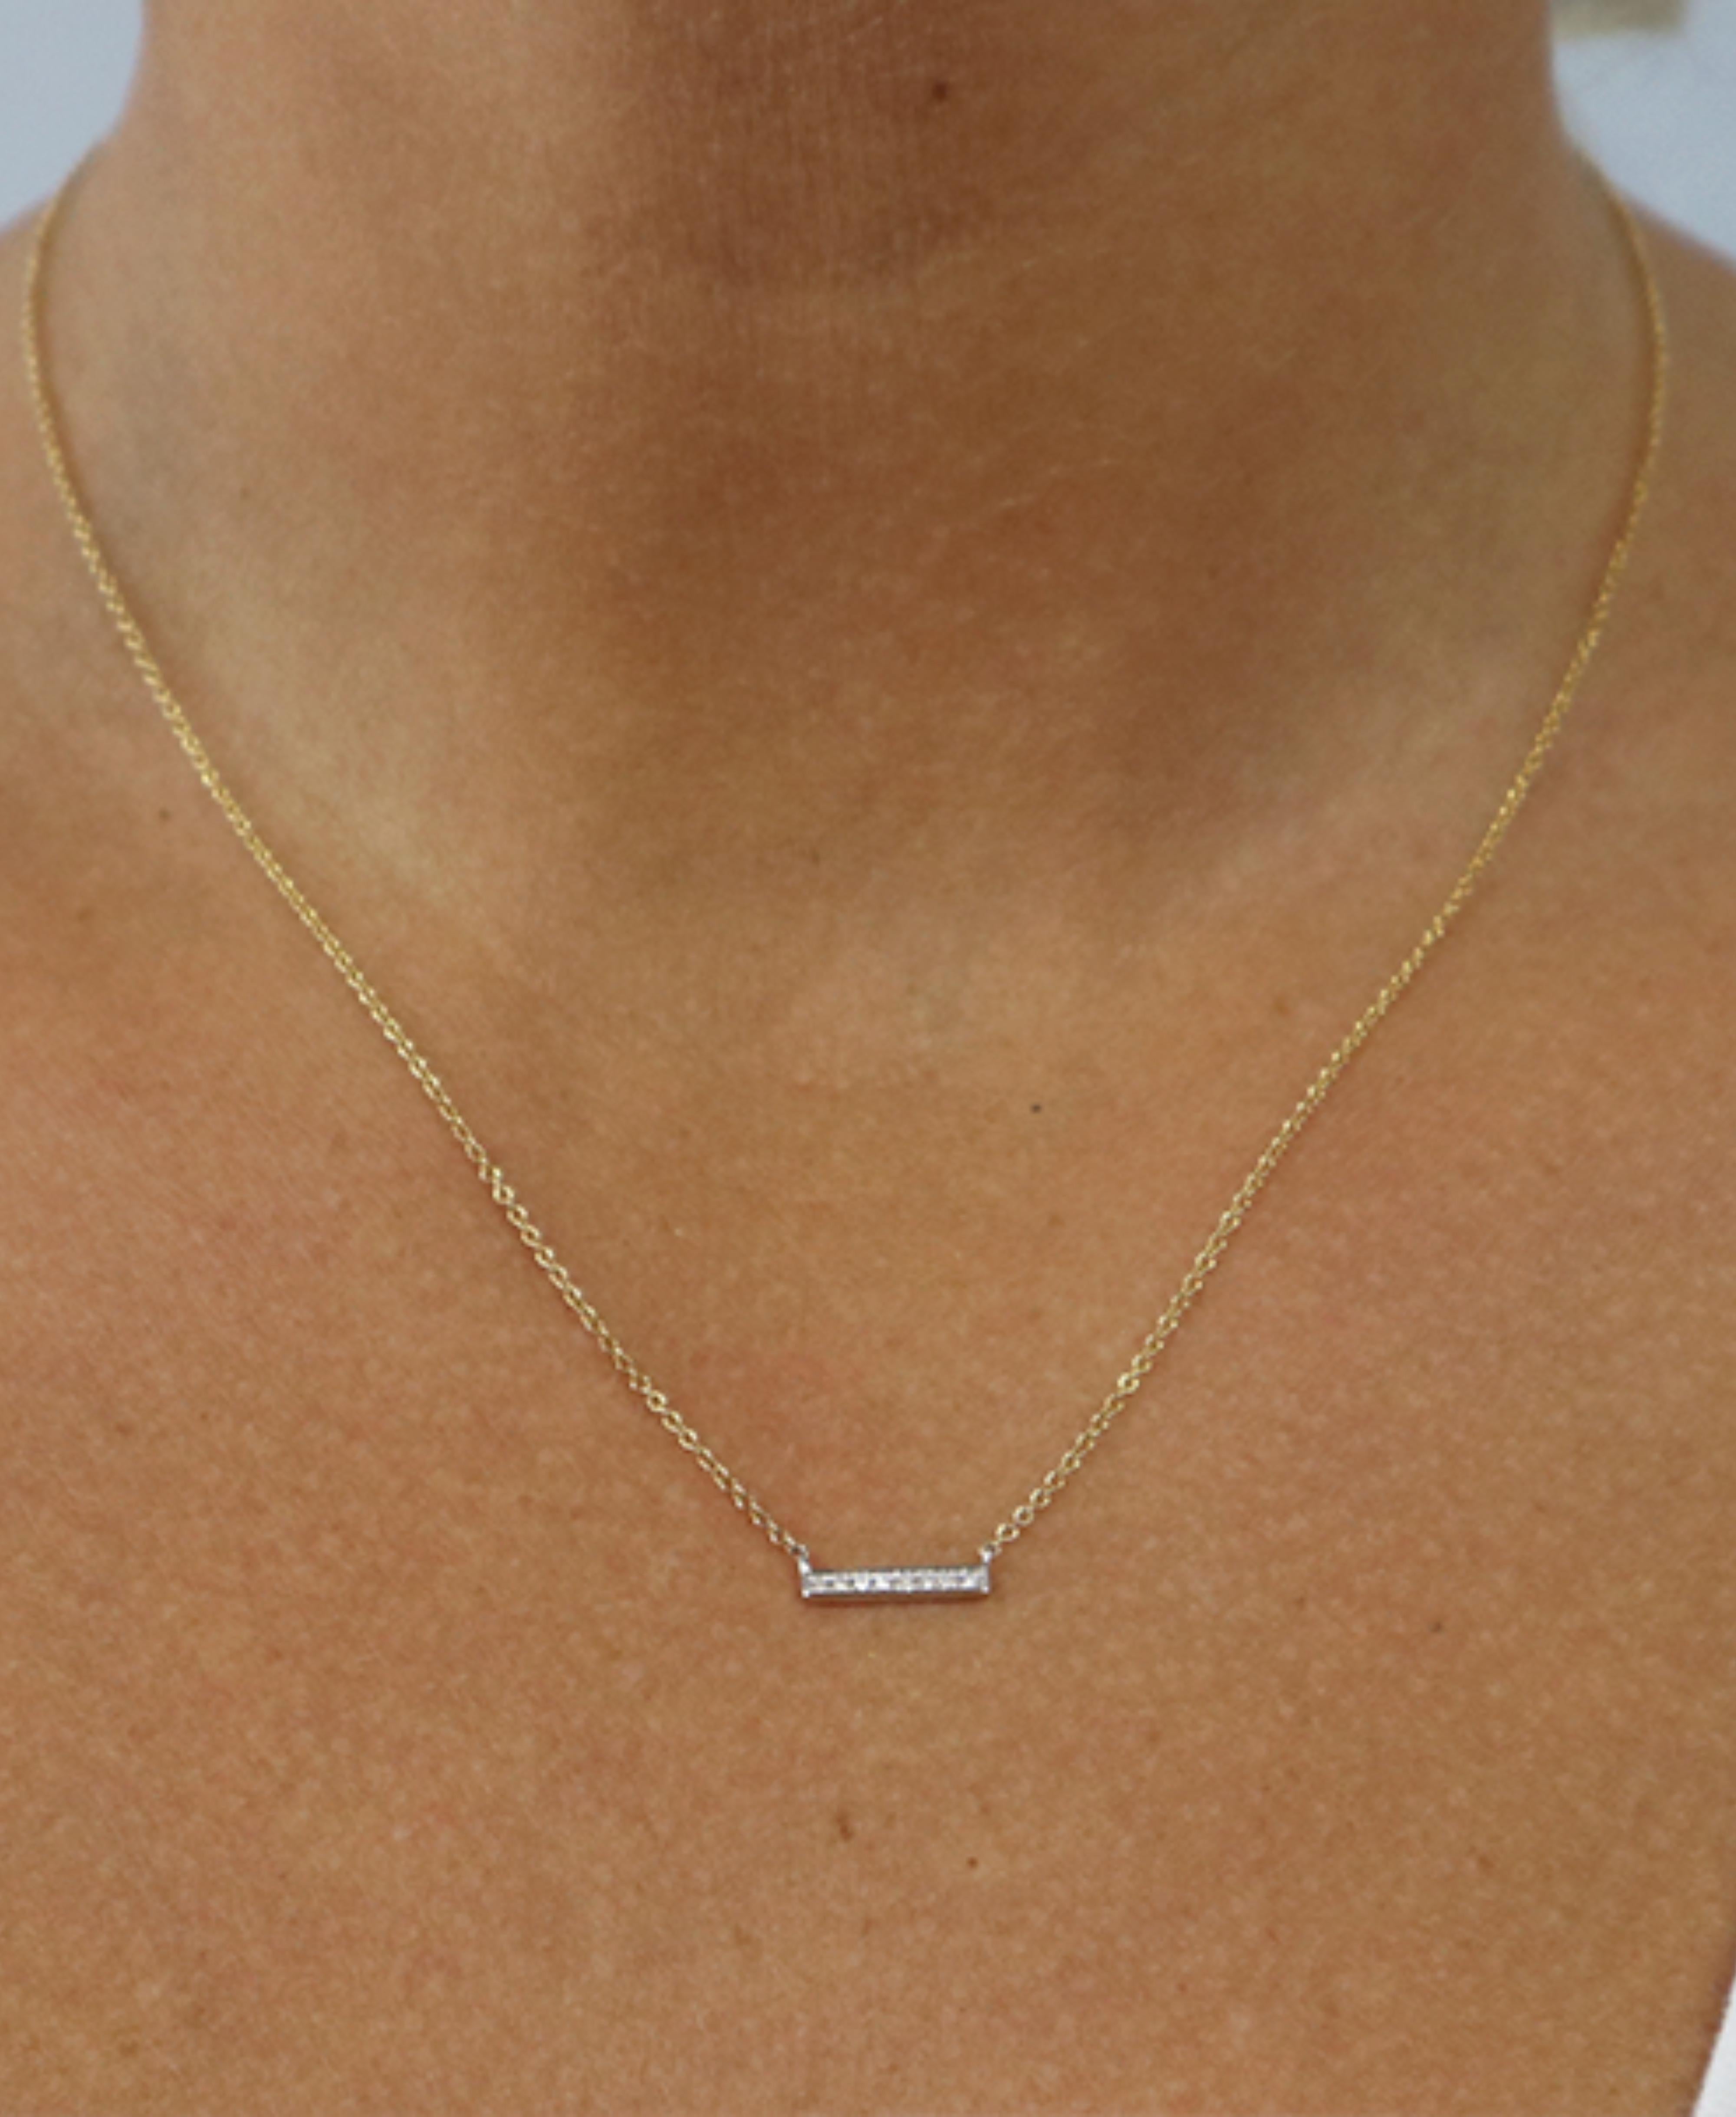 The Mixed-Metal Diamond Bar Necklace is a delicate and charming piece of jewelry that effortlessly marries the elegance of diamonds with the contemporary appeal of mixed metals. This necklace features a slender bar pendant, crafted with a